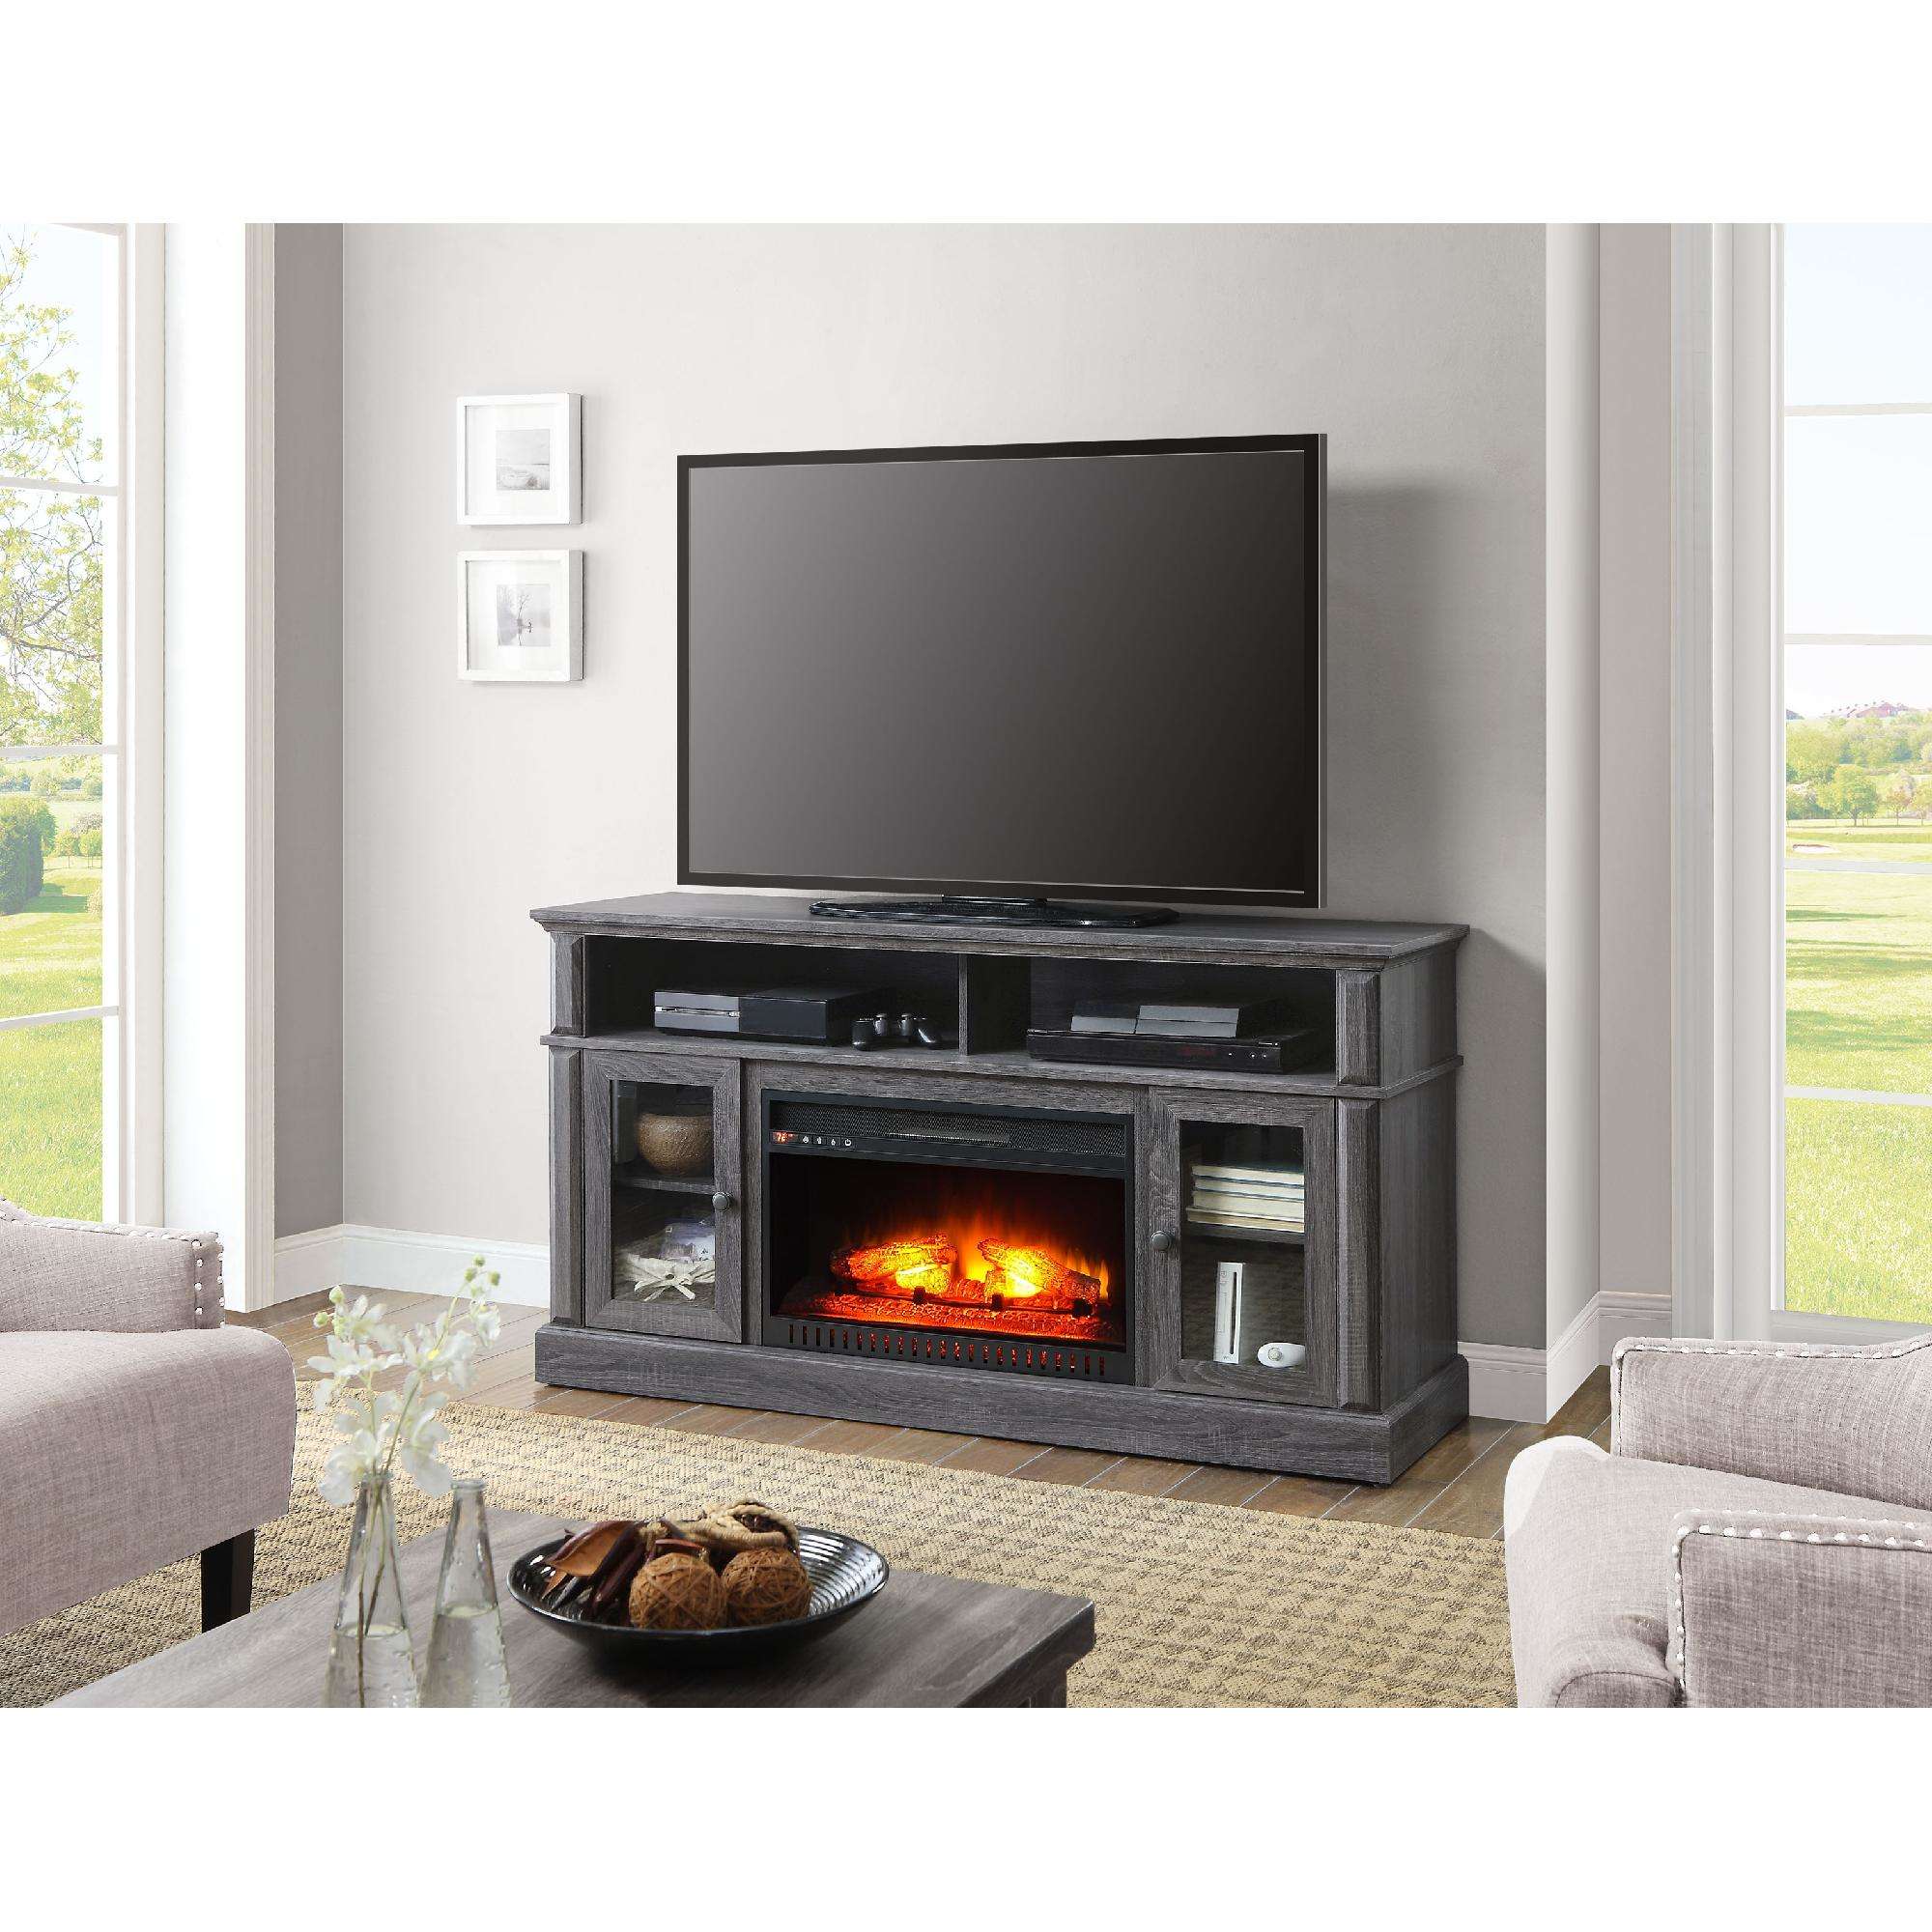 Walmart Electric Fireplace Tv Stand Elegant Whalen Barston Media Fireplace for Tv S Up to 70 Multiple Finishes